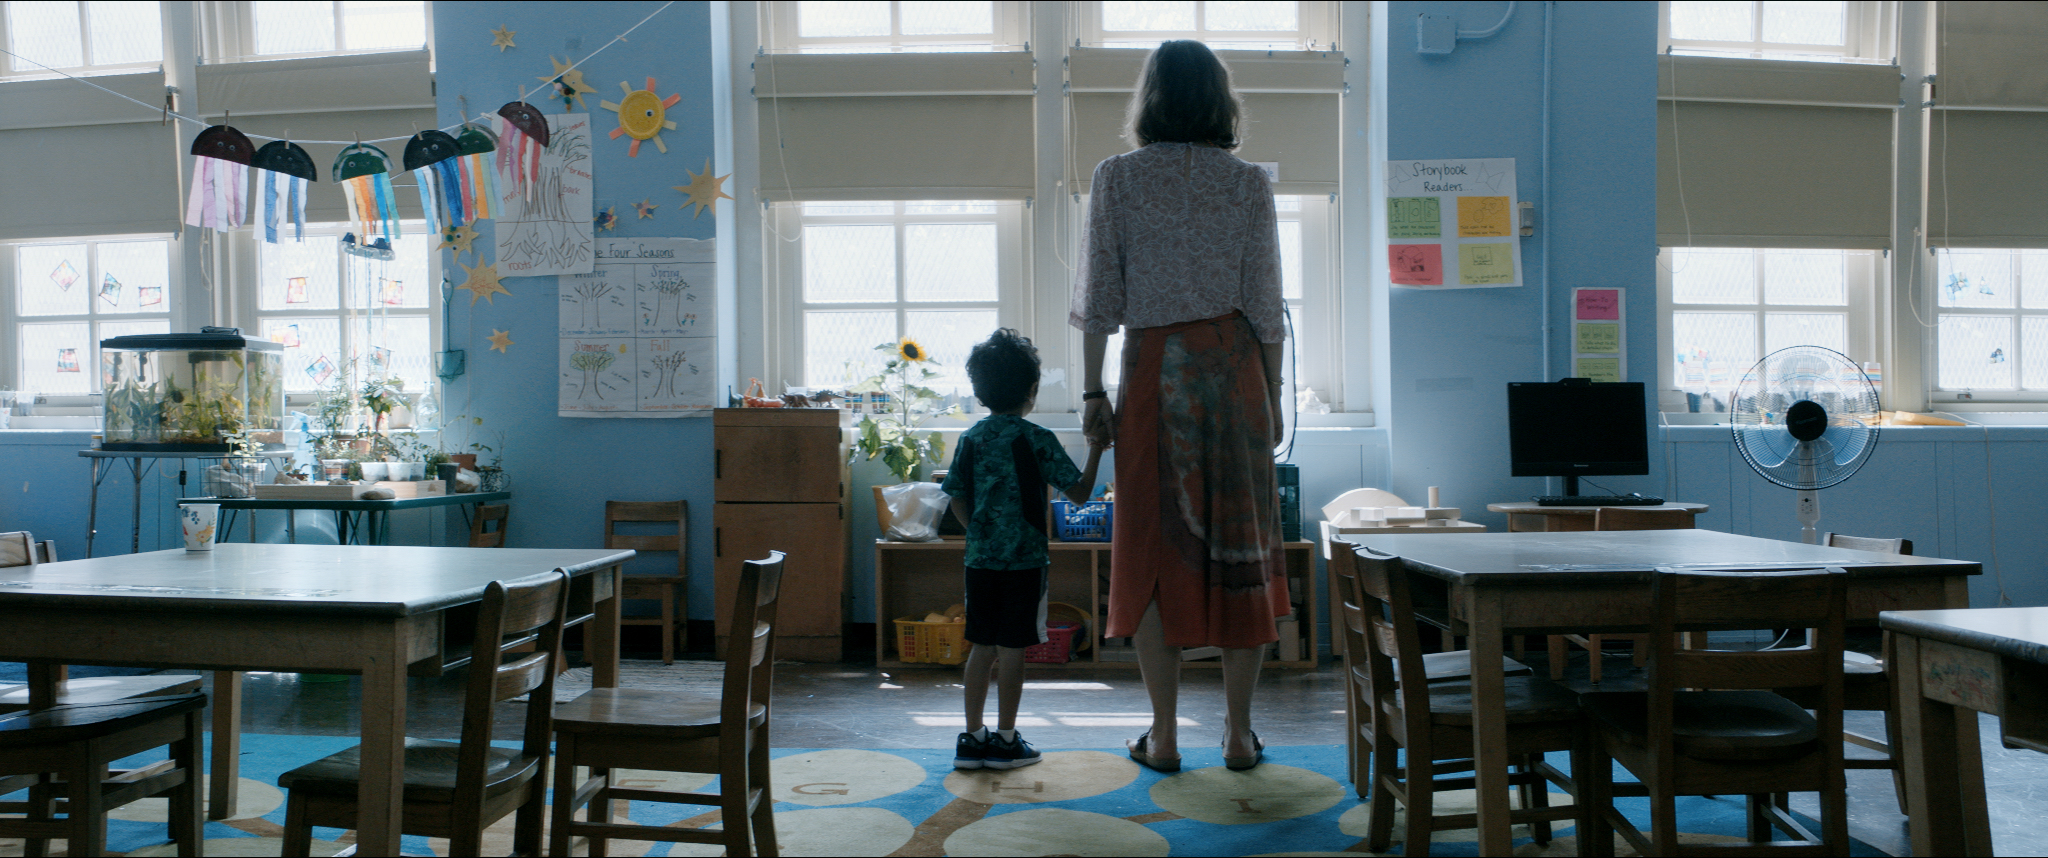 A white woman in a long skirt and white blouse stands with her back to the audience, holding hands with a small child with dark hair, both looking out a window in what appears to be a classroom.